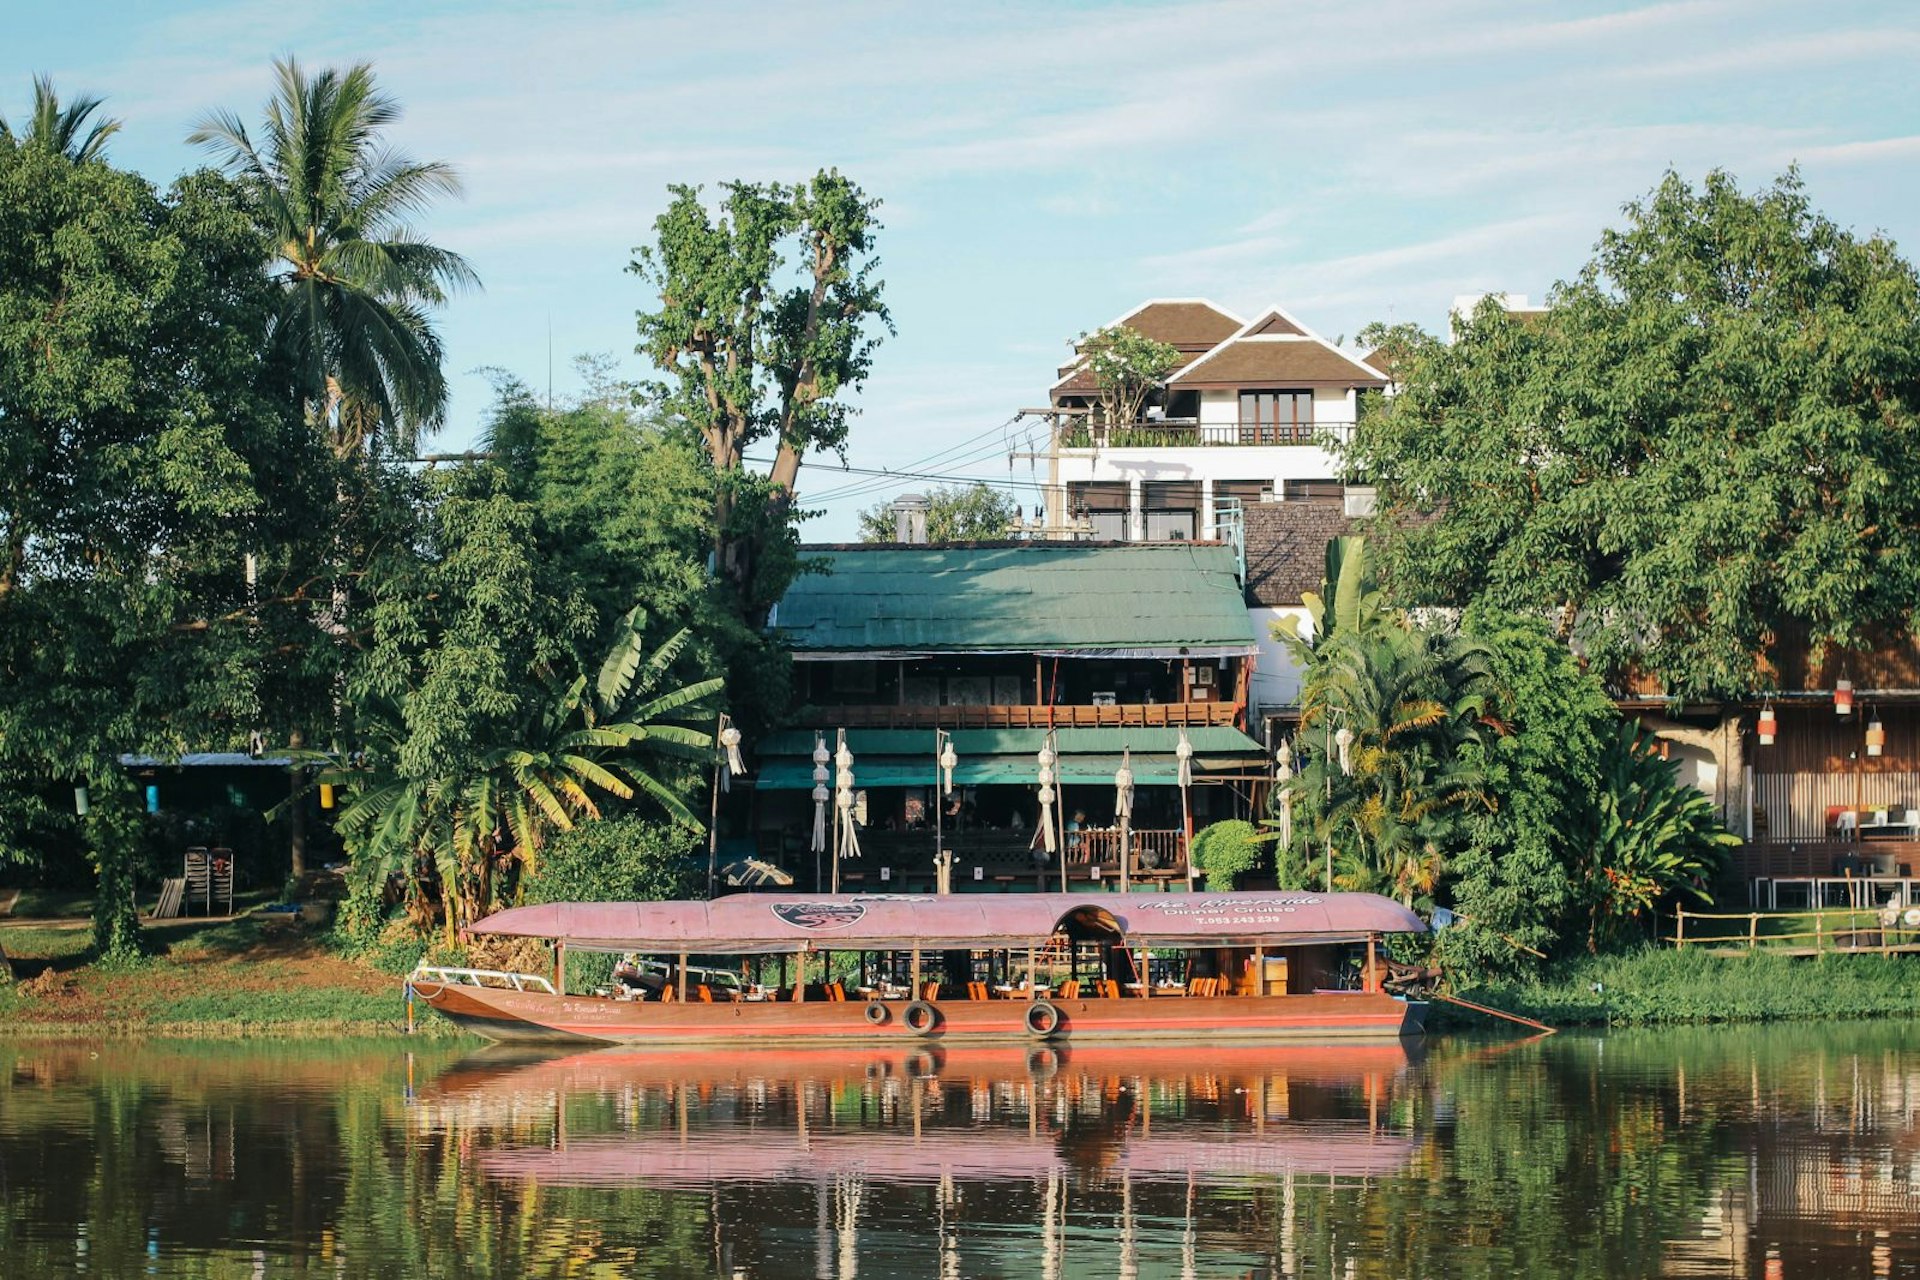 Join Chiang Mai locals for a meal and a tipple at The Riverside Bar and Restaurant © Alana Morgan / Lonely Planet